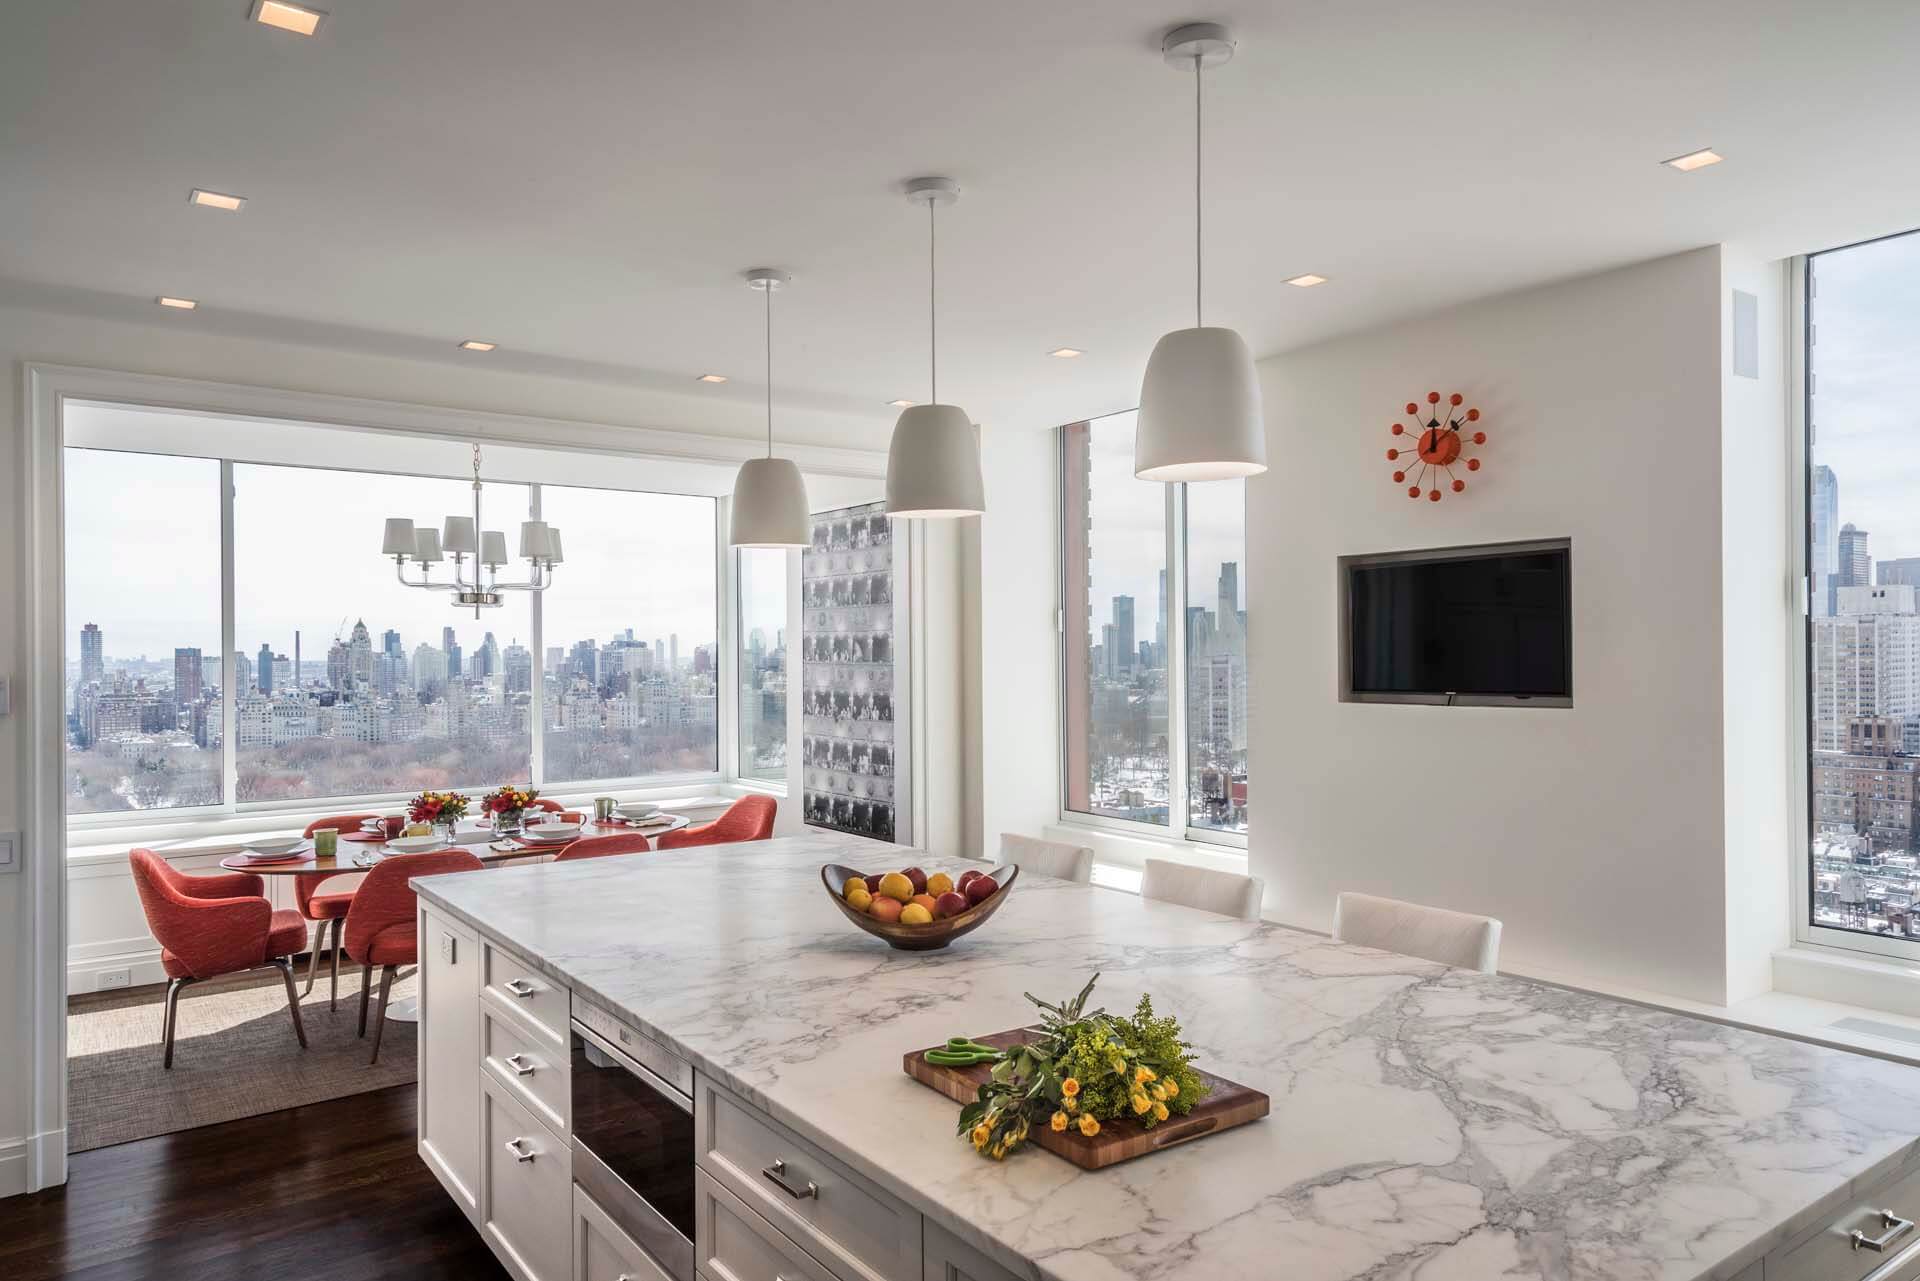 All-white kitchen features marble-topped Rutt cabinetry island with built-in microwave and an adjacent dining area with skyline view.